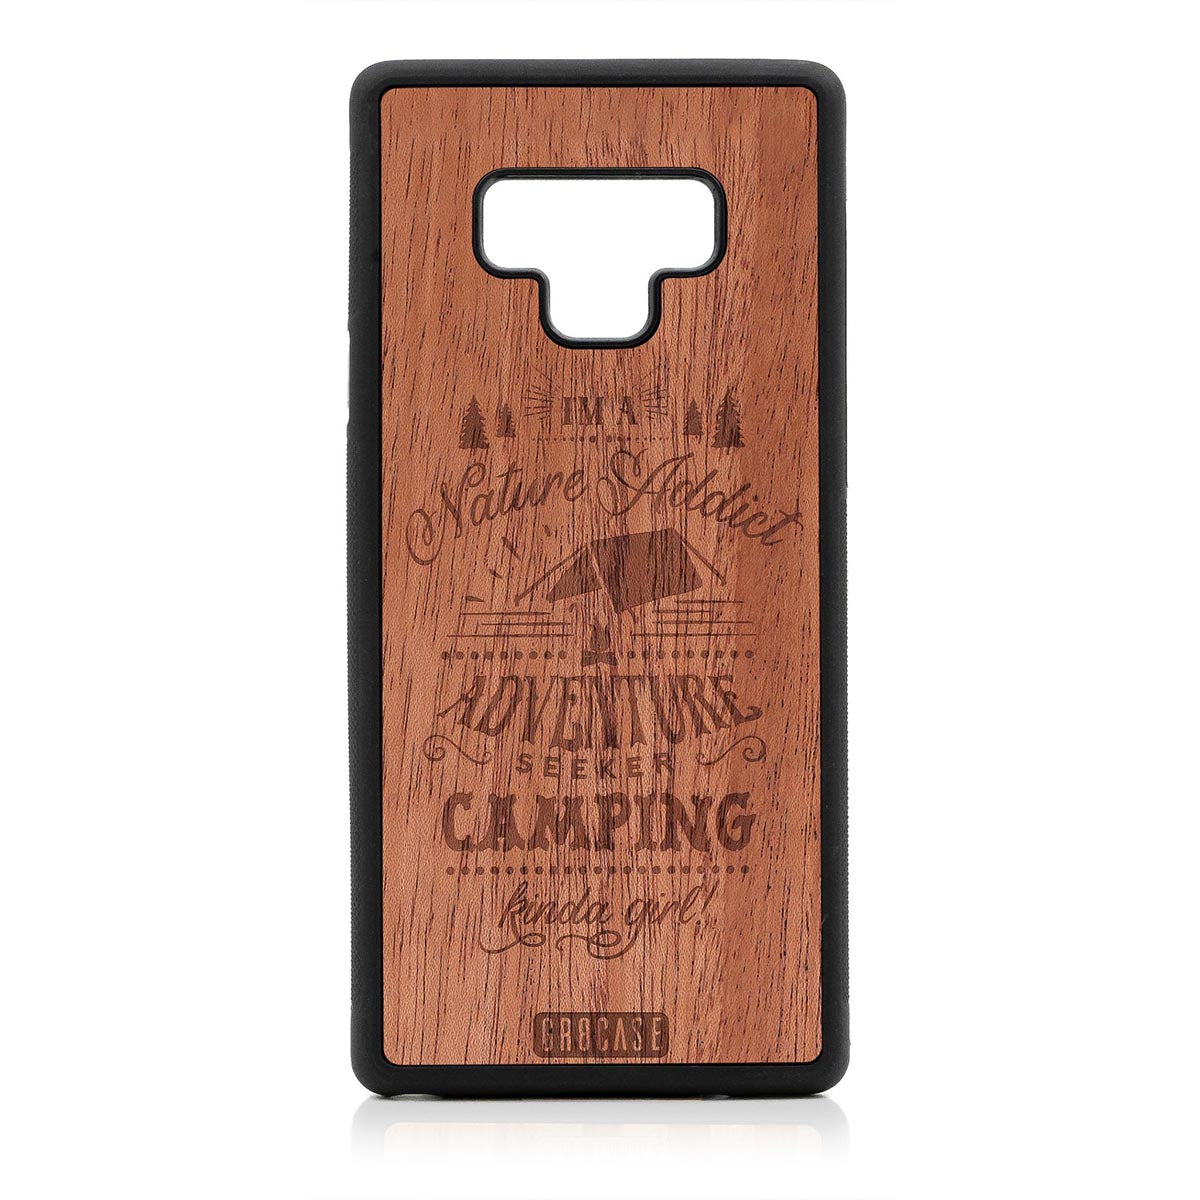 I'm A Nature Addict Adventure Seeker Camping Kinda Girl Design Wood Case Samsung Galaxy Note 9 by GR8CASE